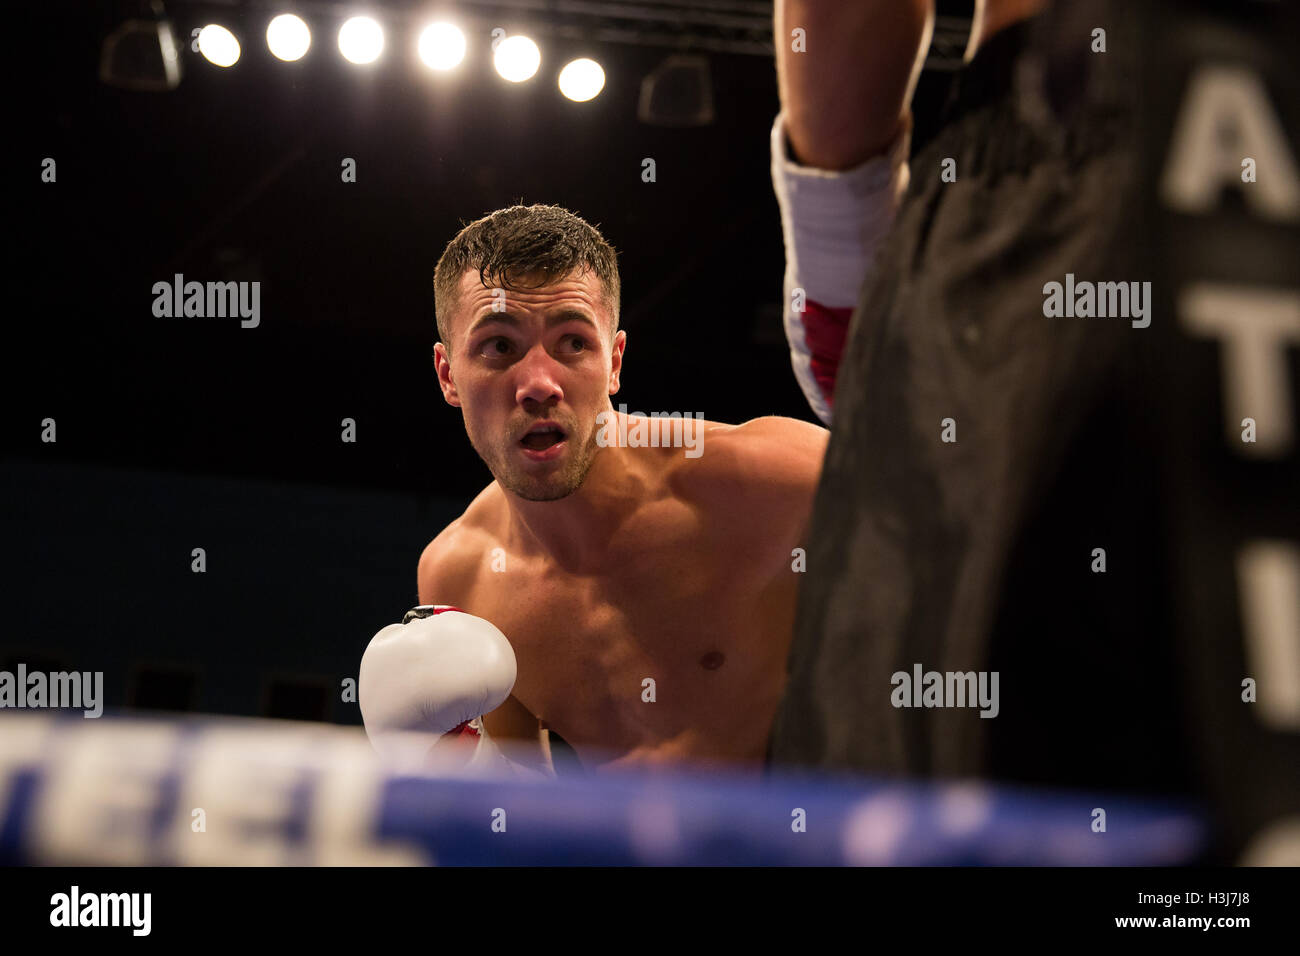 Sam McNess during a boxing bout Stock Photo